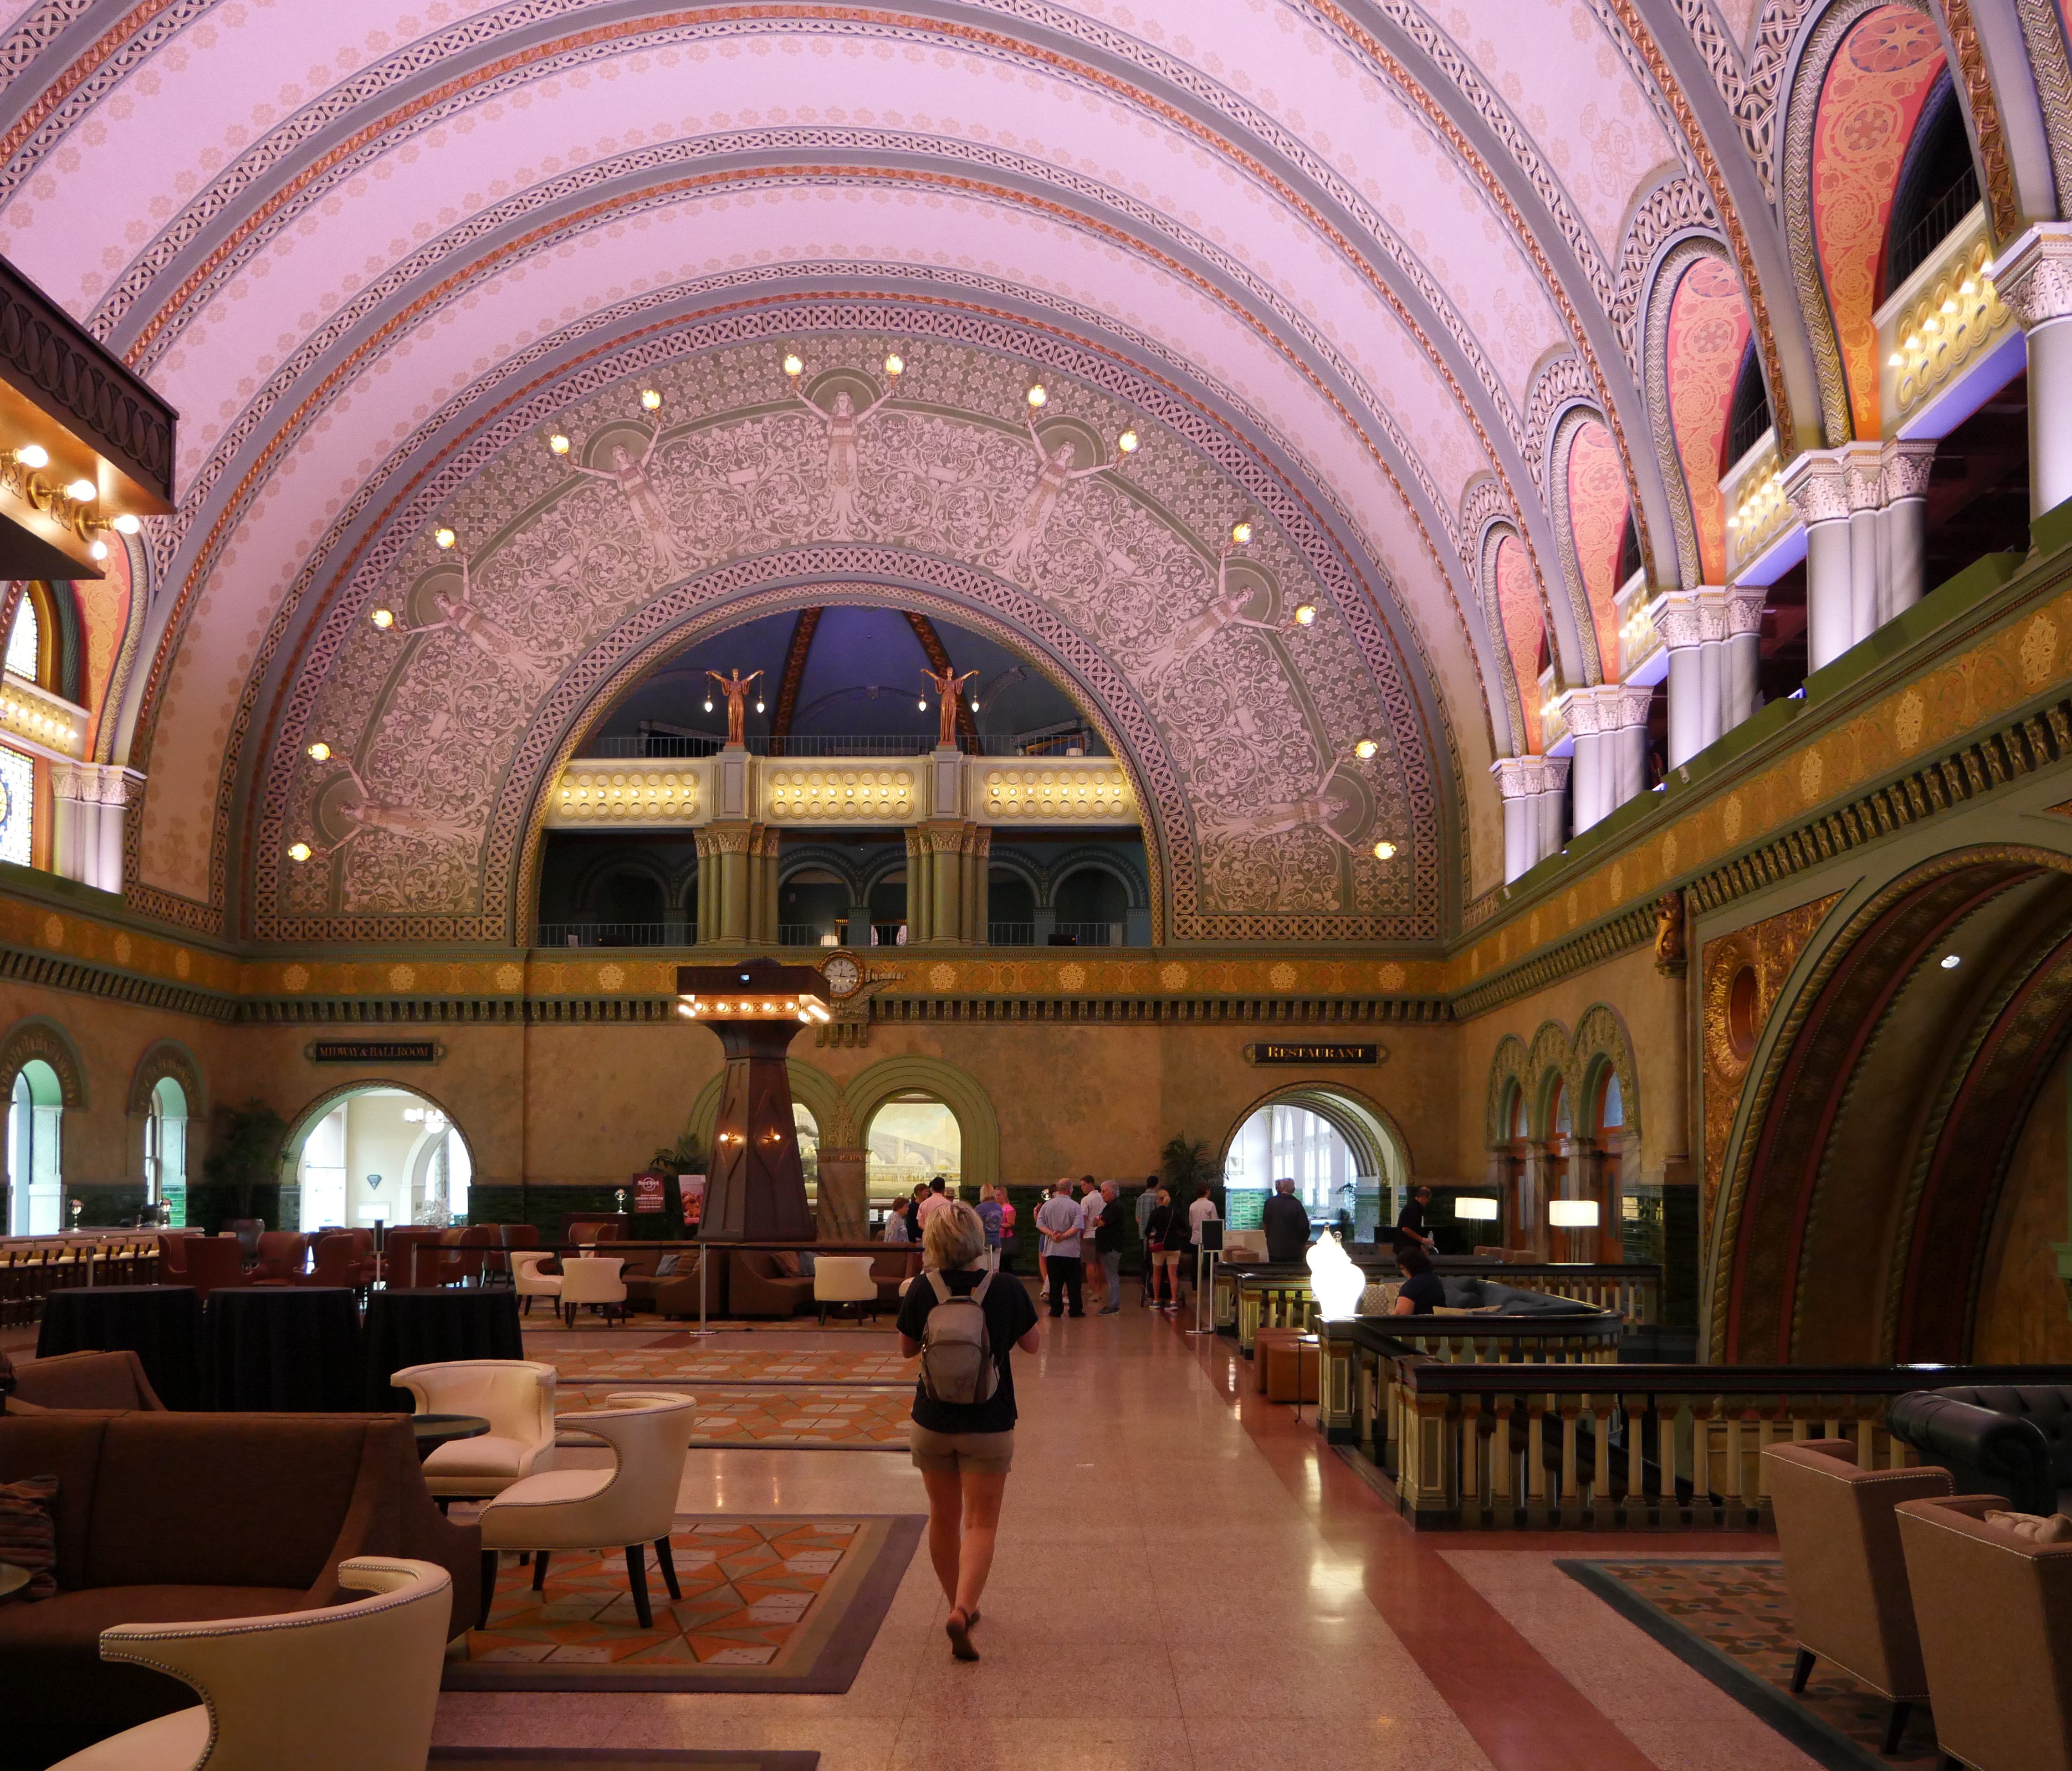 St. Louis Union Station Hotel's 65-foot barrel vaulted ceiling features a high-def light show each day.